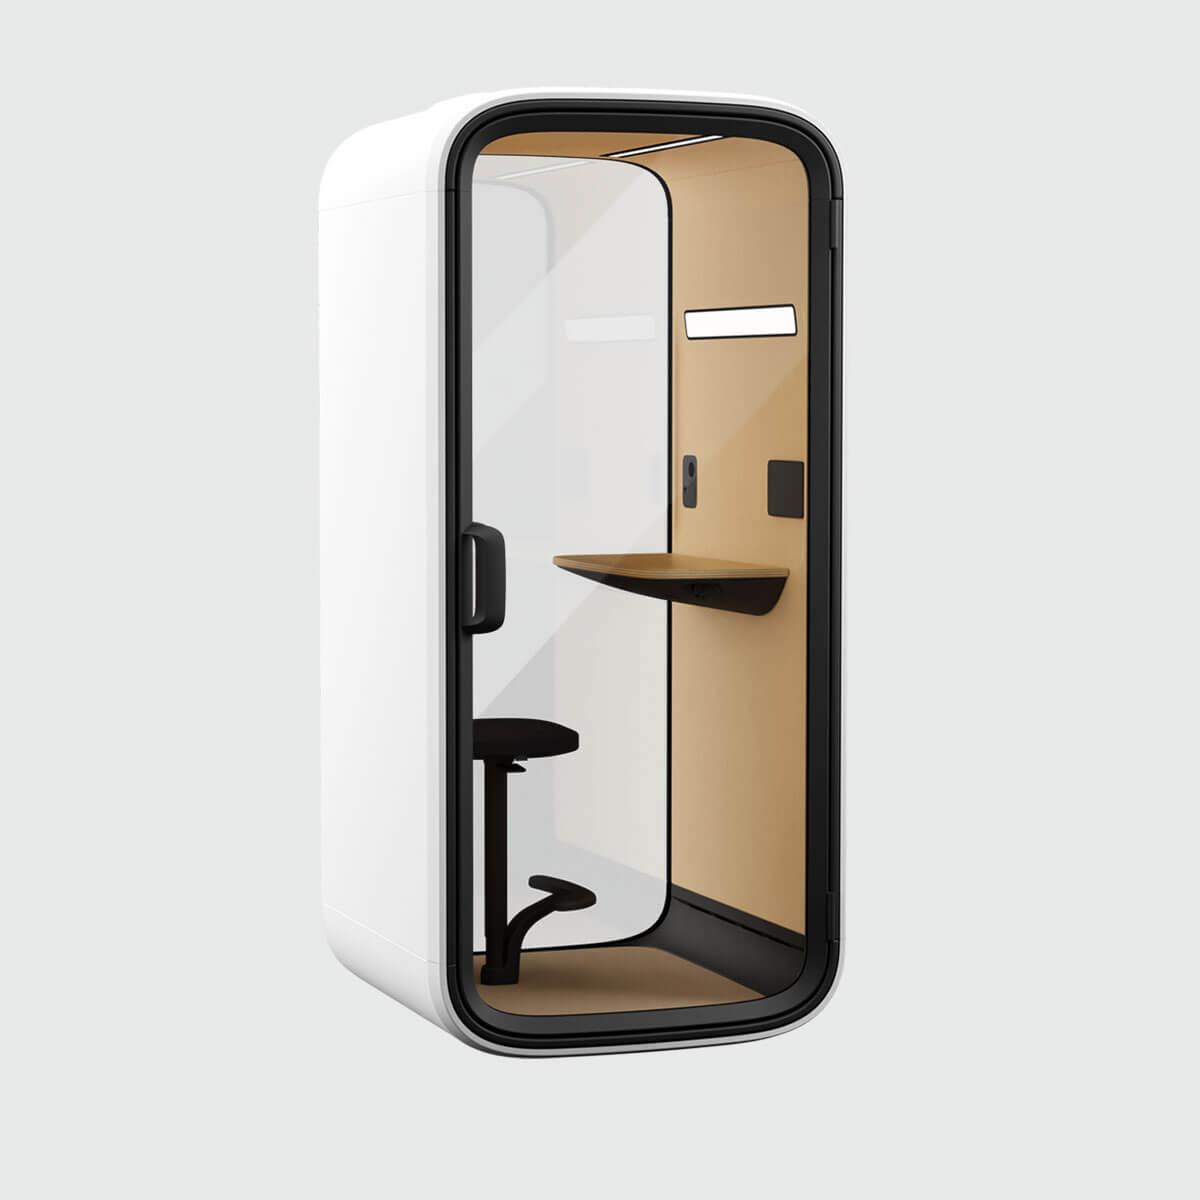 Framery One Compact, a smart office phone booth.